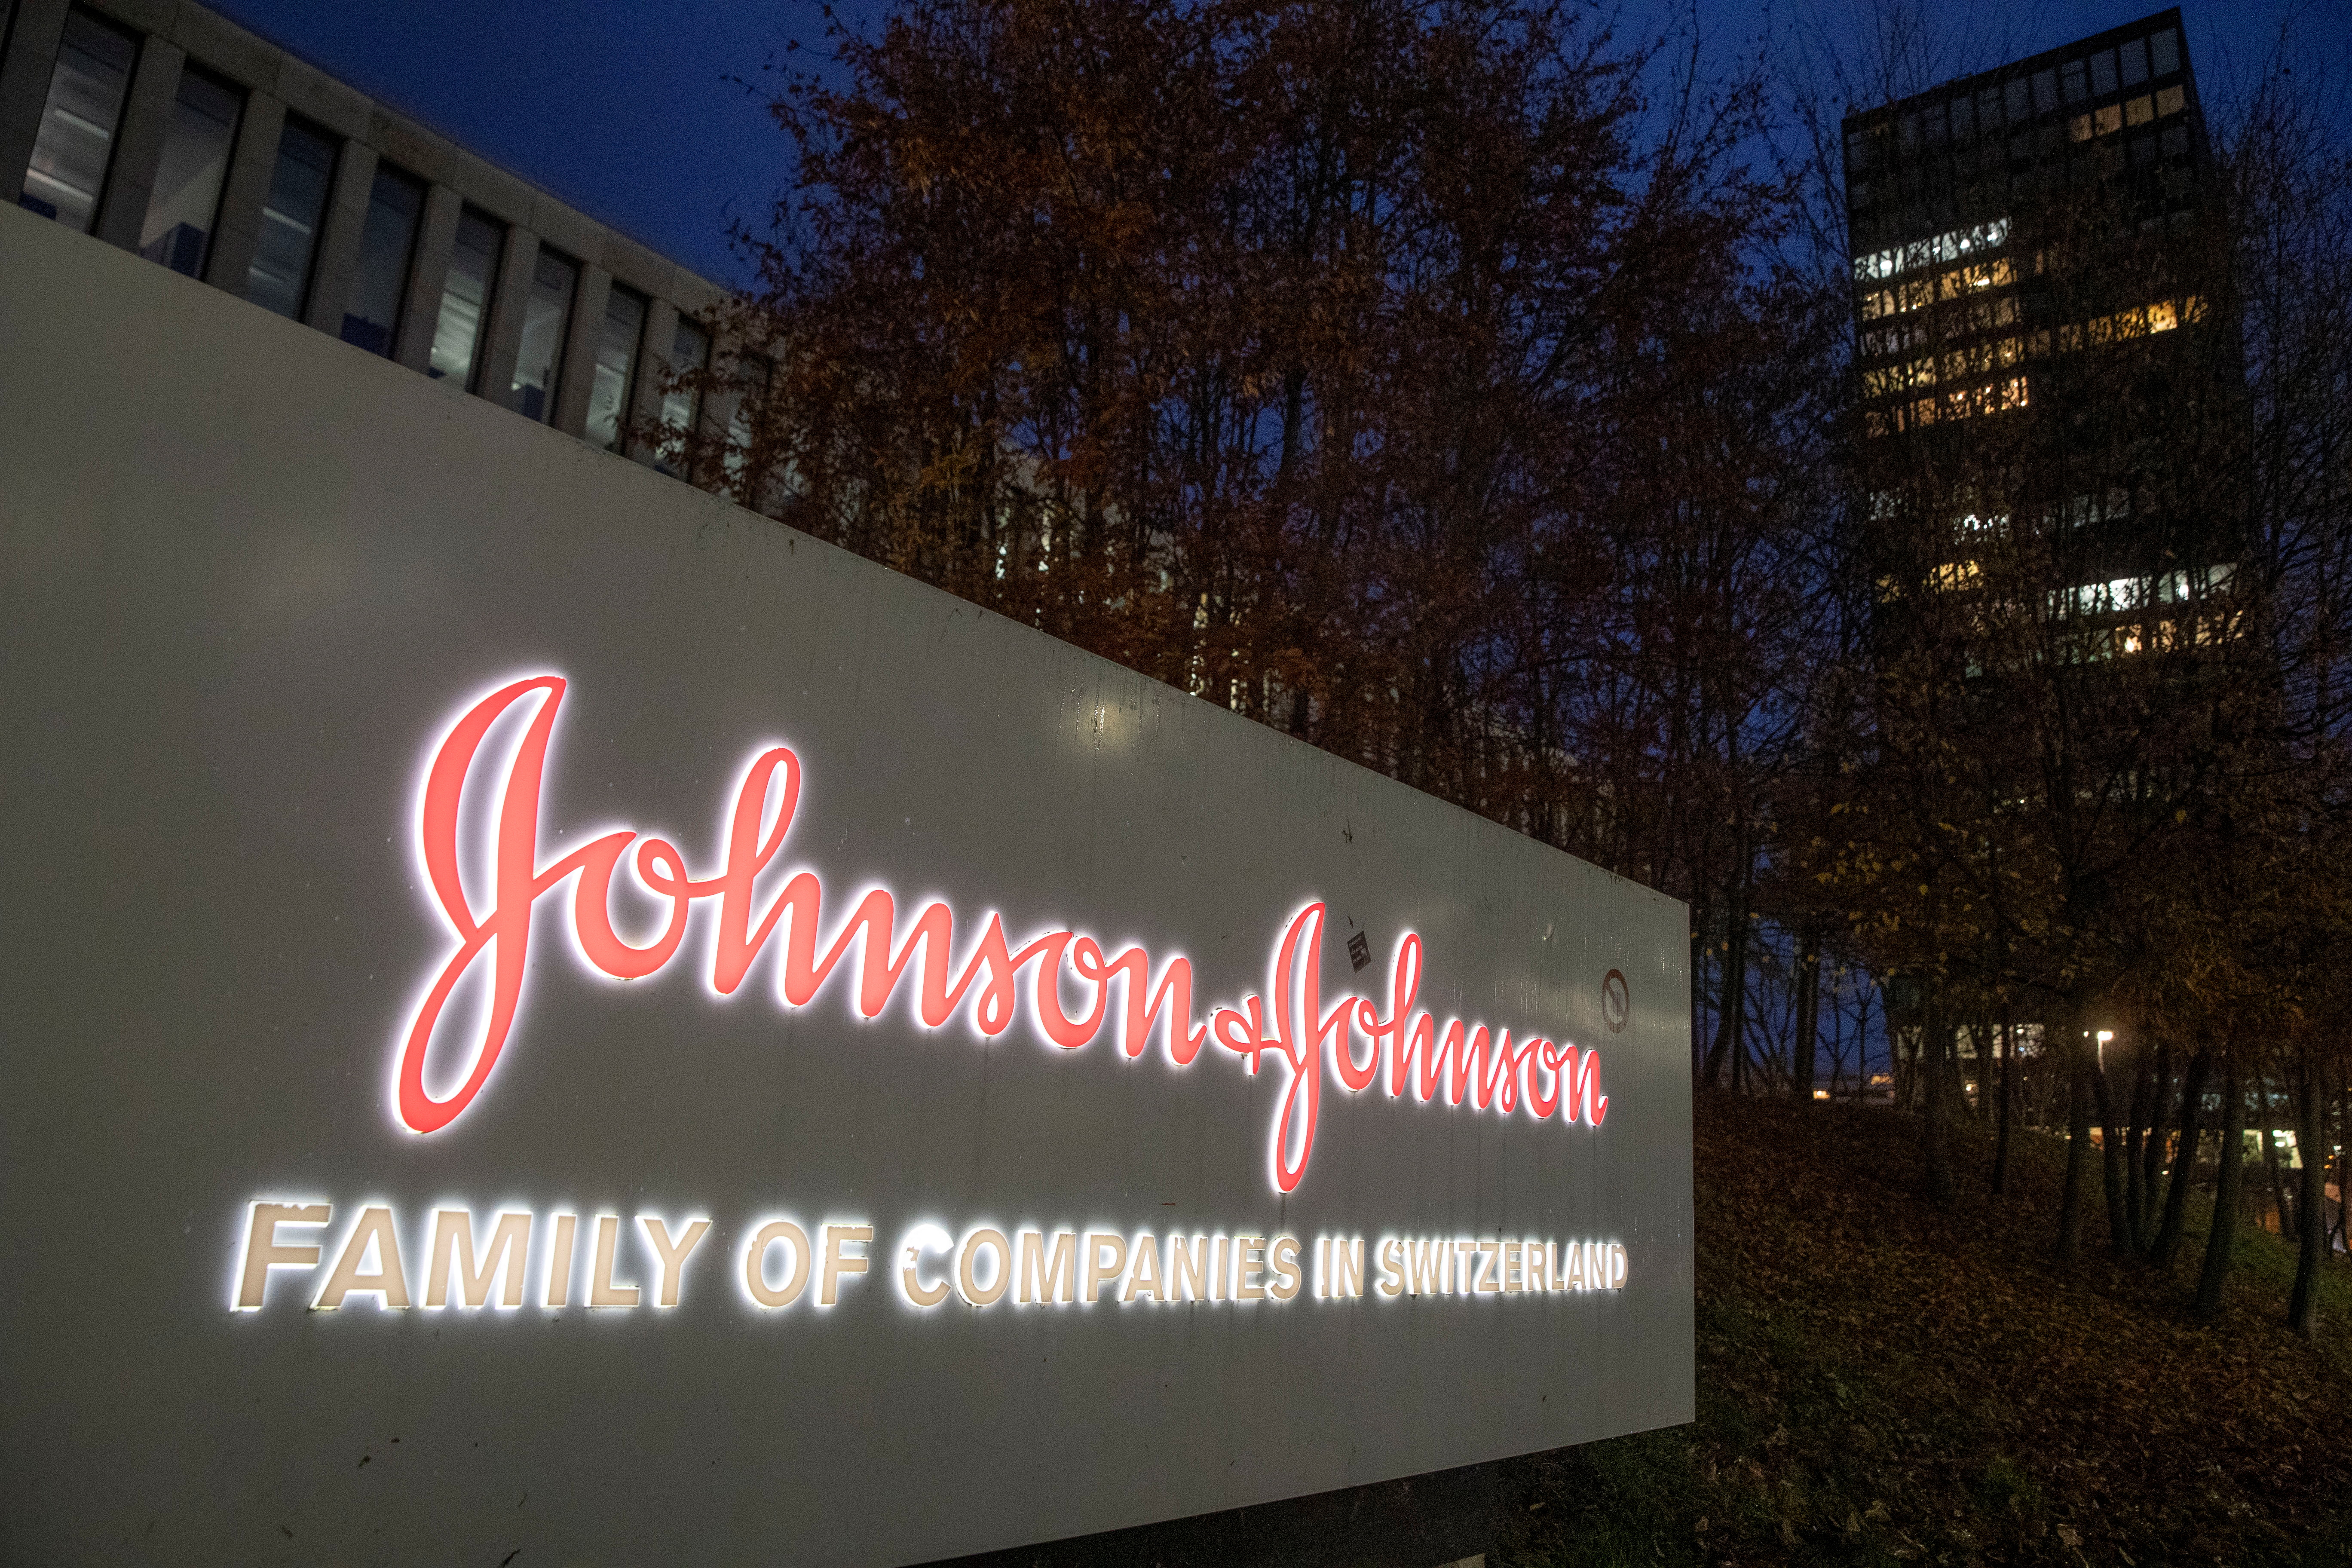 The logo of healthcare company Johnson & Johnson is seen in front of an office building in Zug, Switzerland. REUTERS/Arnd Wiegmann